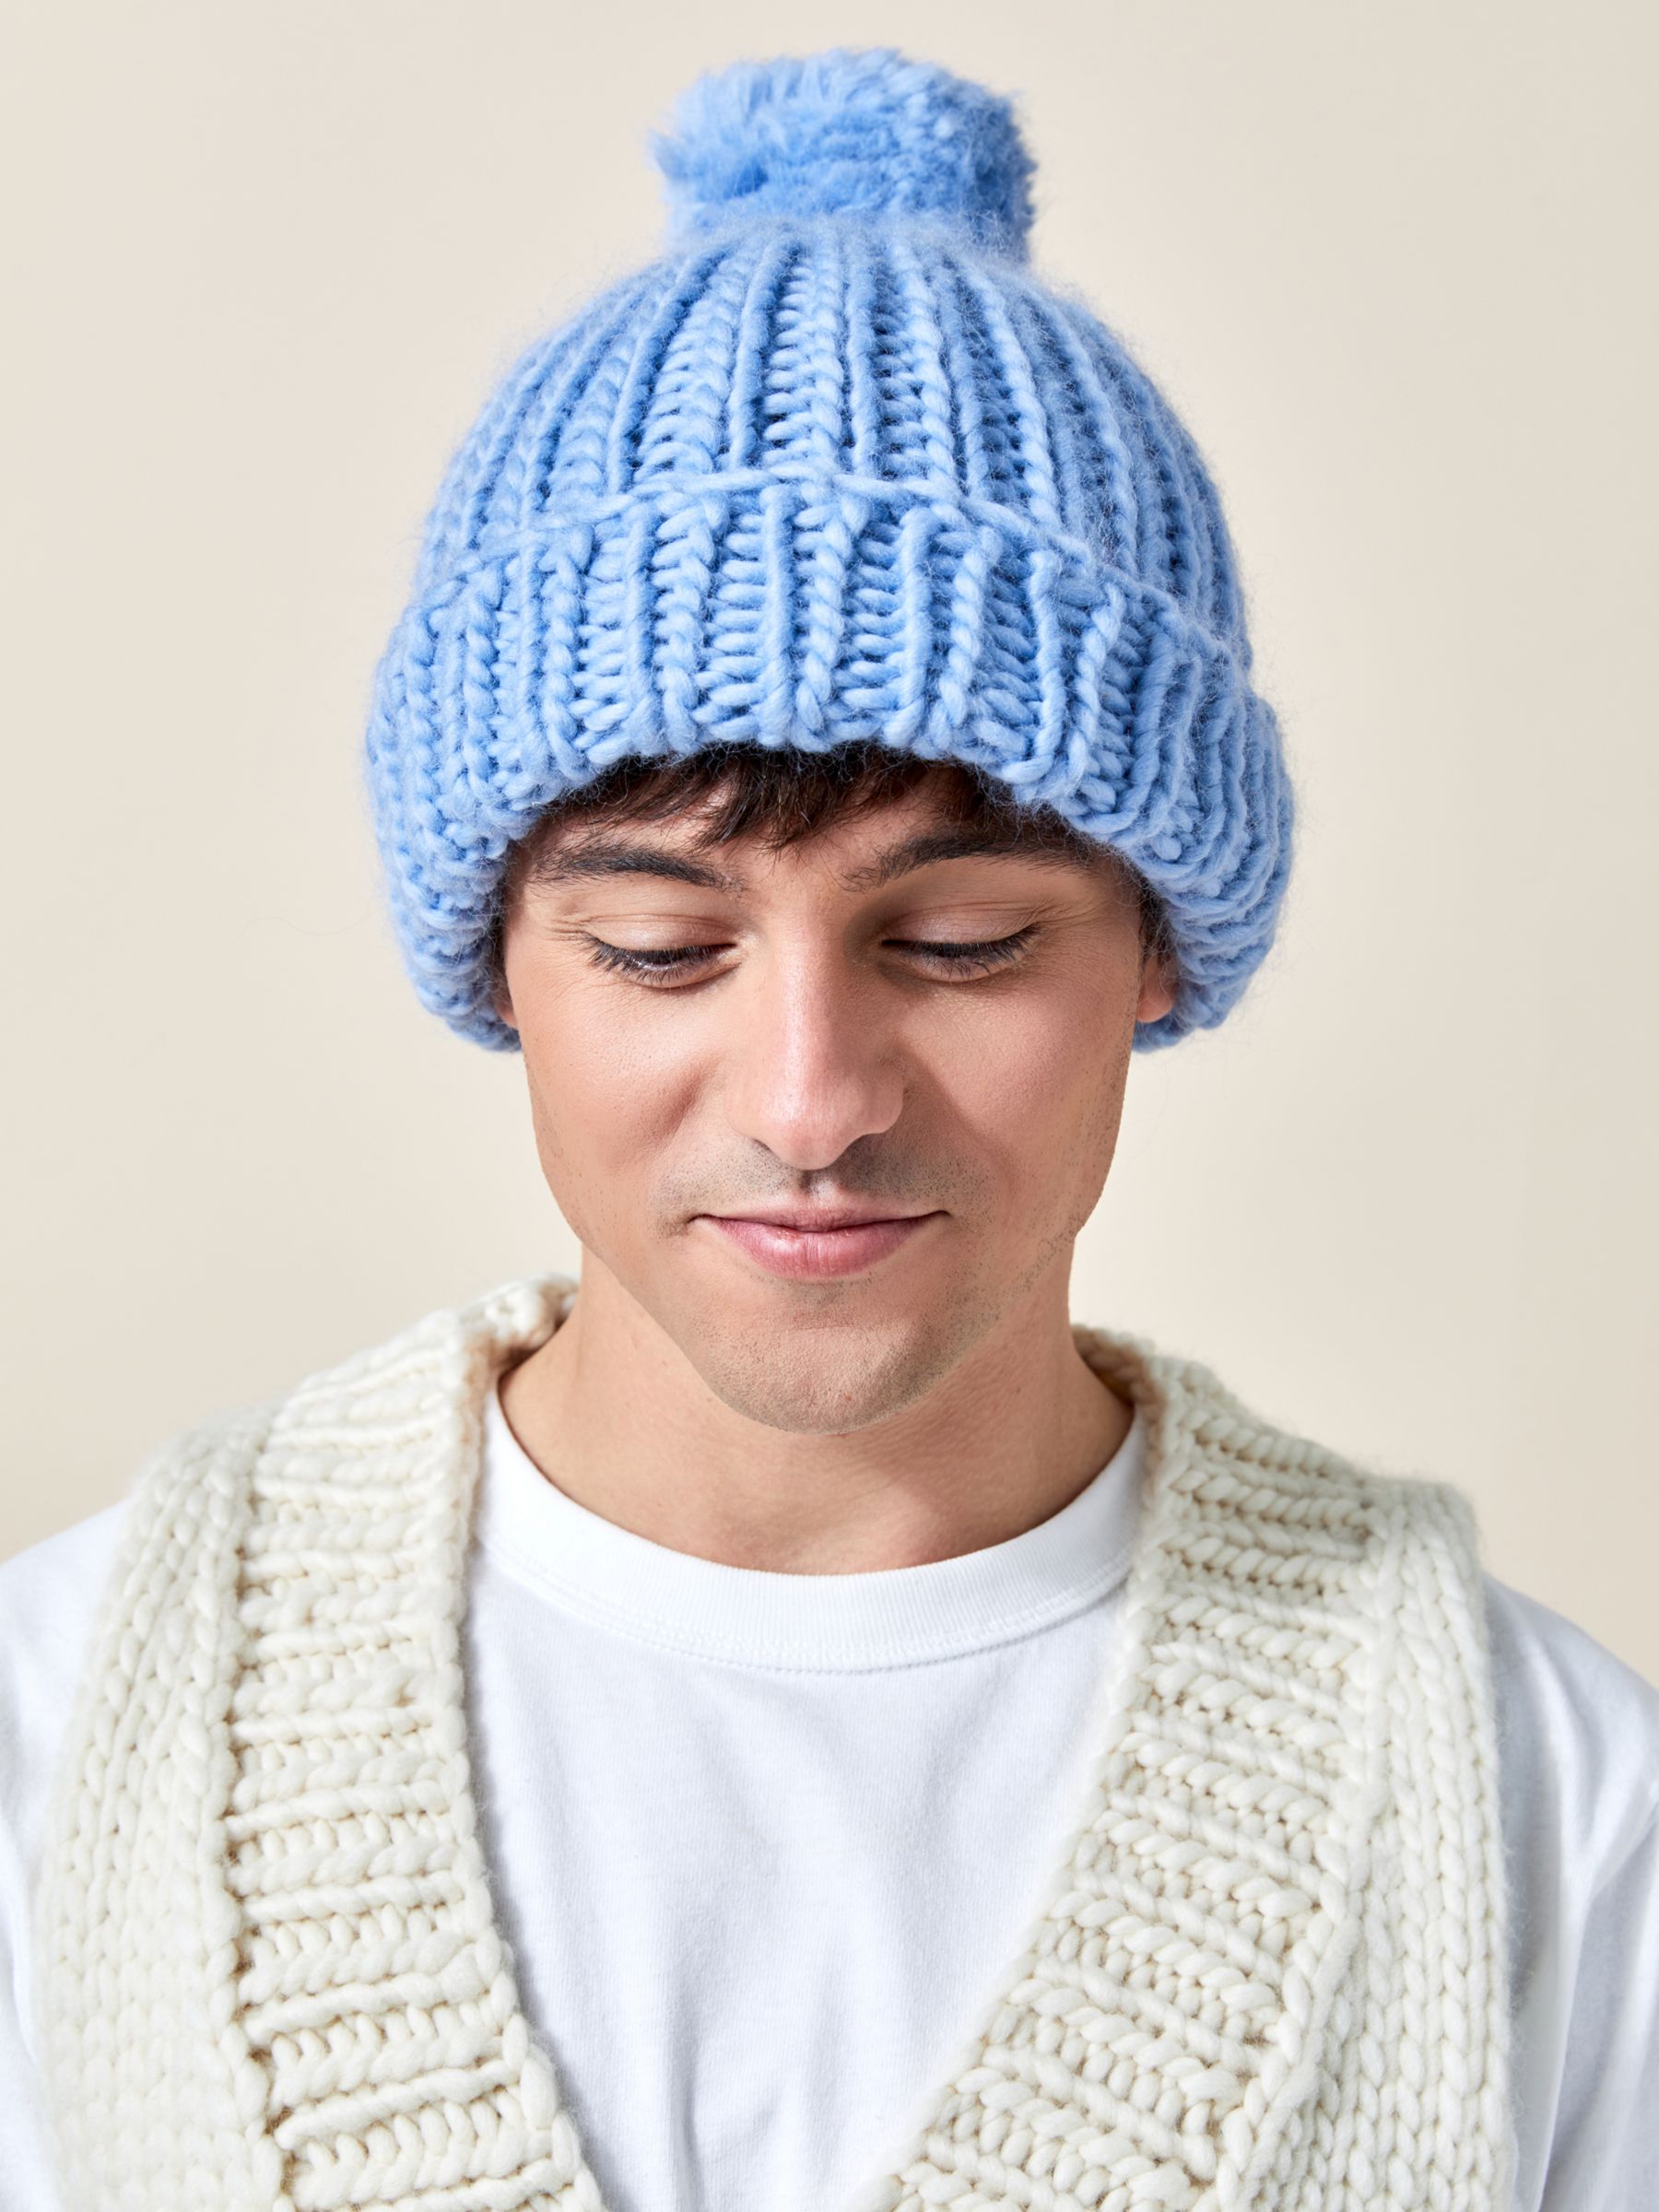 Made With Love by Tom Daley Winter Warmer Hat, Knitting Kit, Aquatic Blue